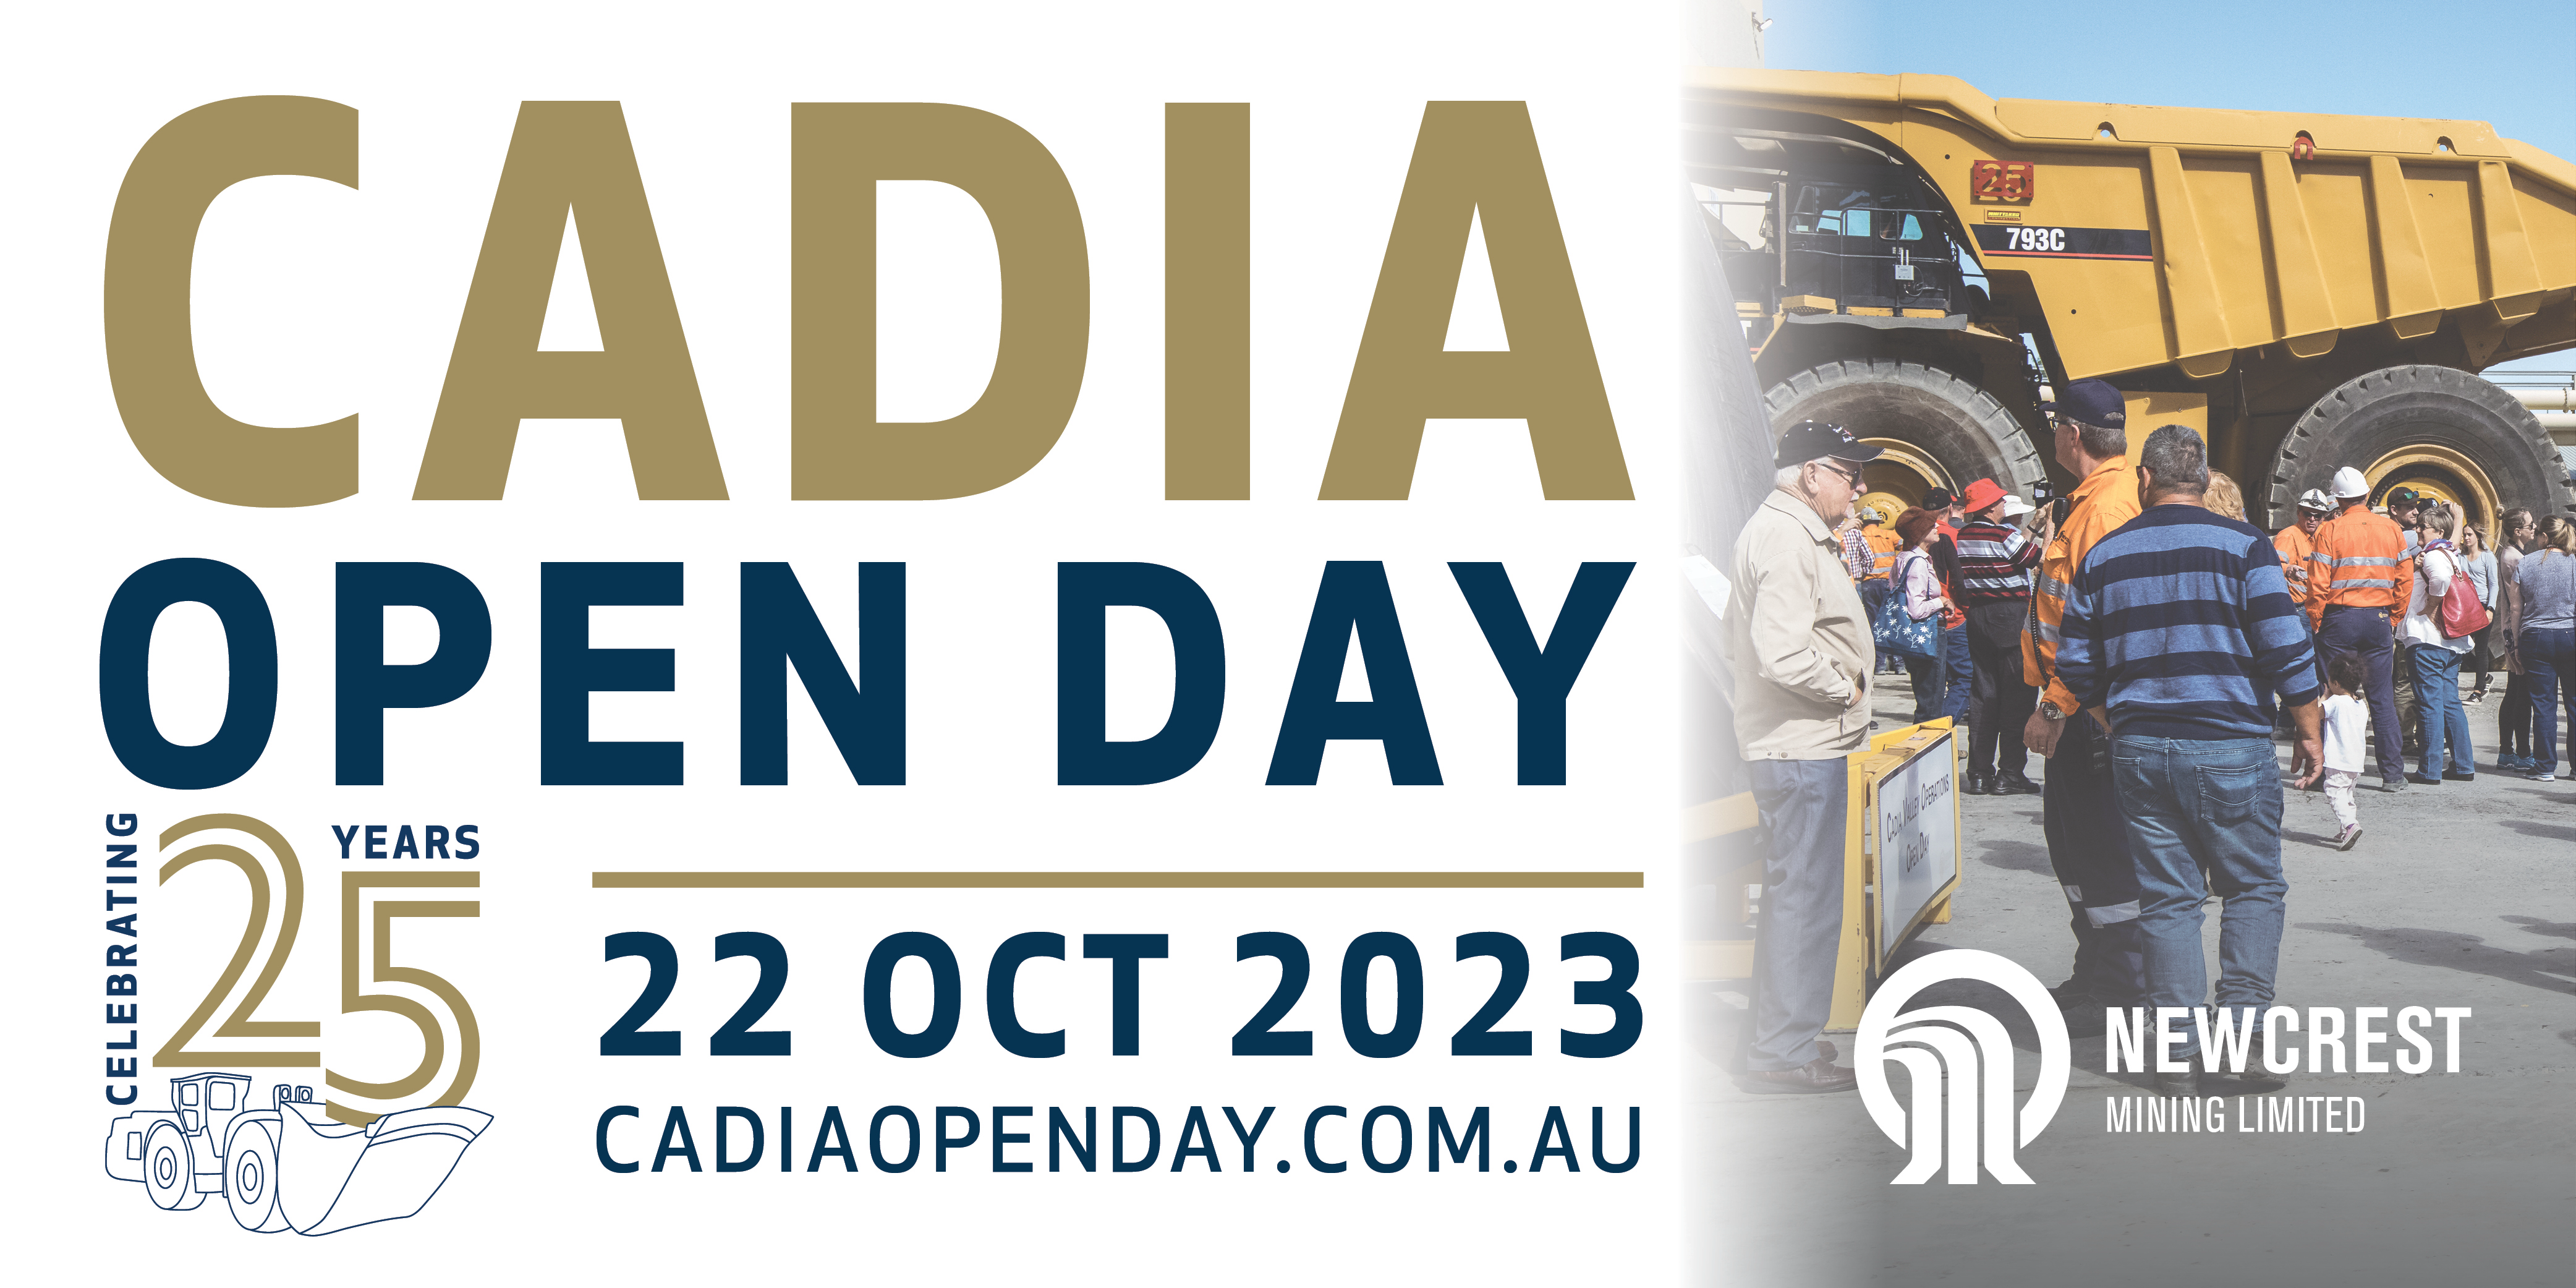 Cadia Open Day 23